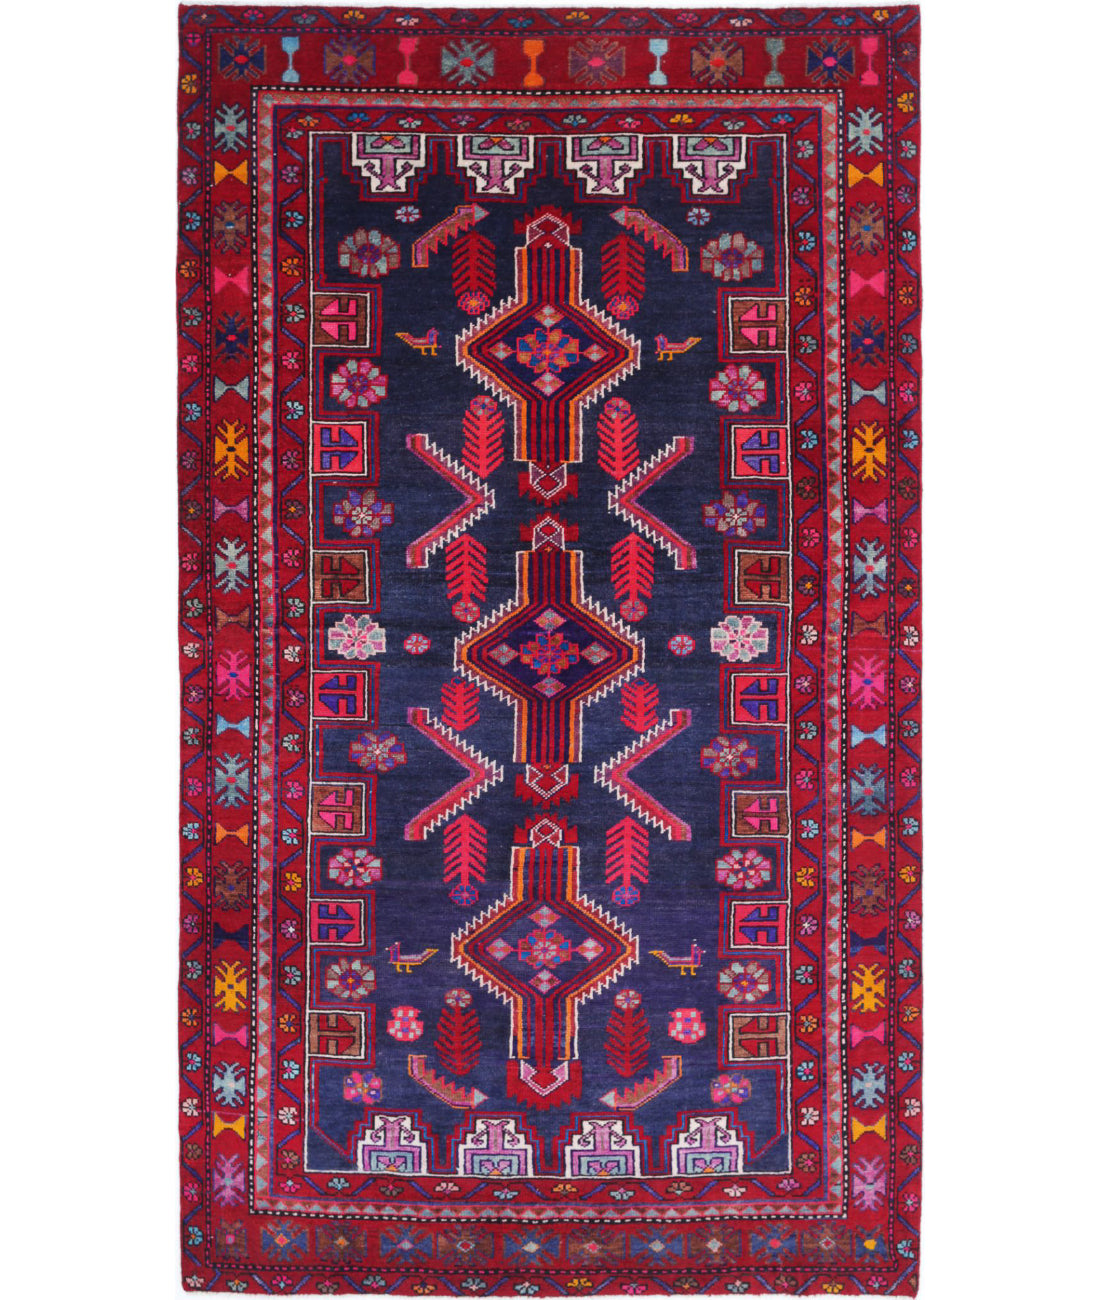 Hand Knotted Persian Hamadan Wool Rug - 4'10'' x 8'10'' 4'10'' x 8'10'' (145 X 265) / Blue / Red